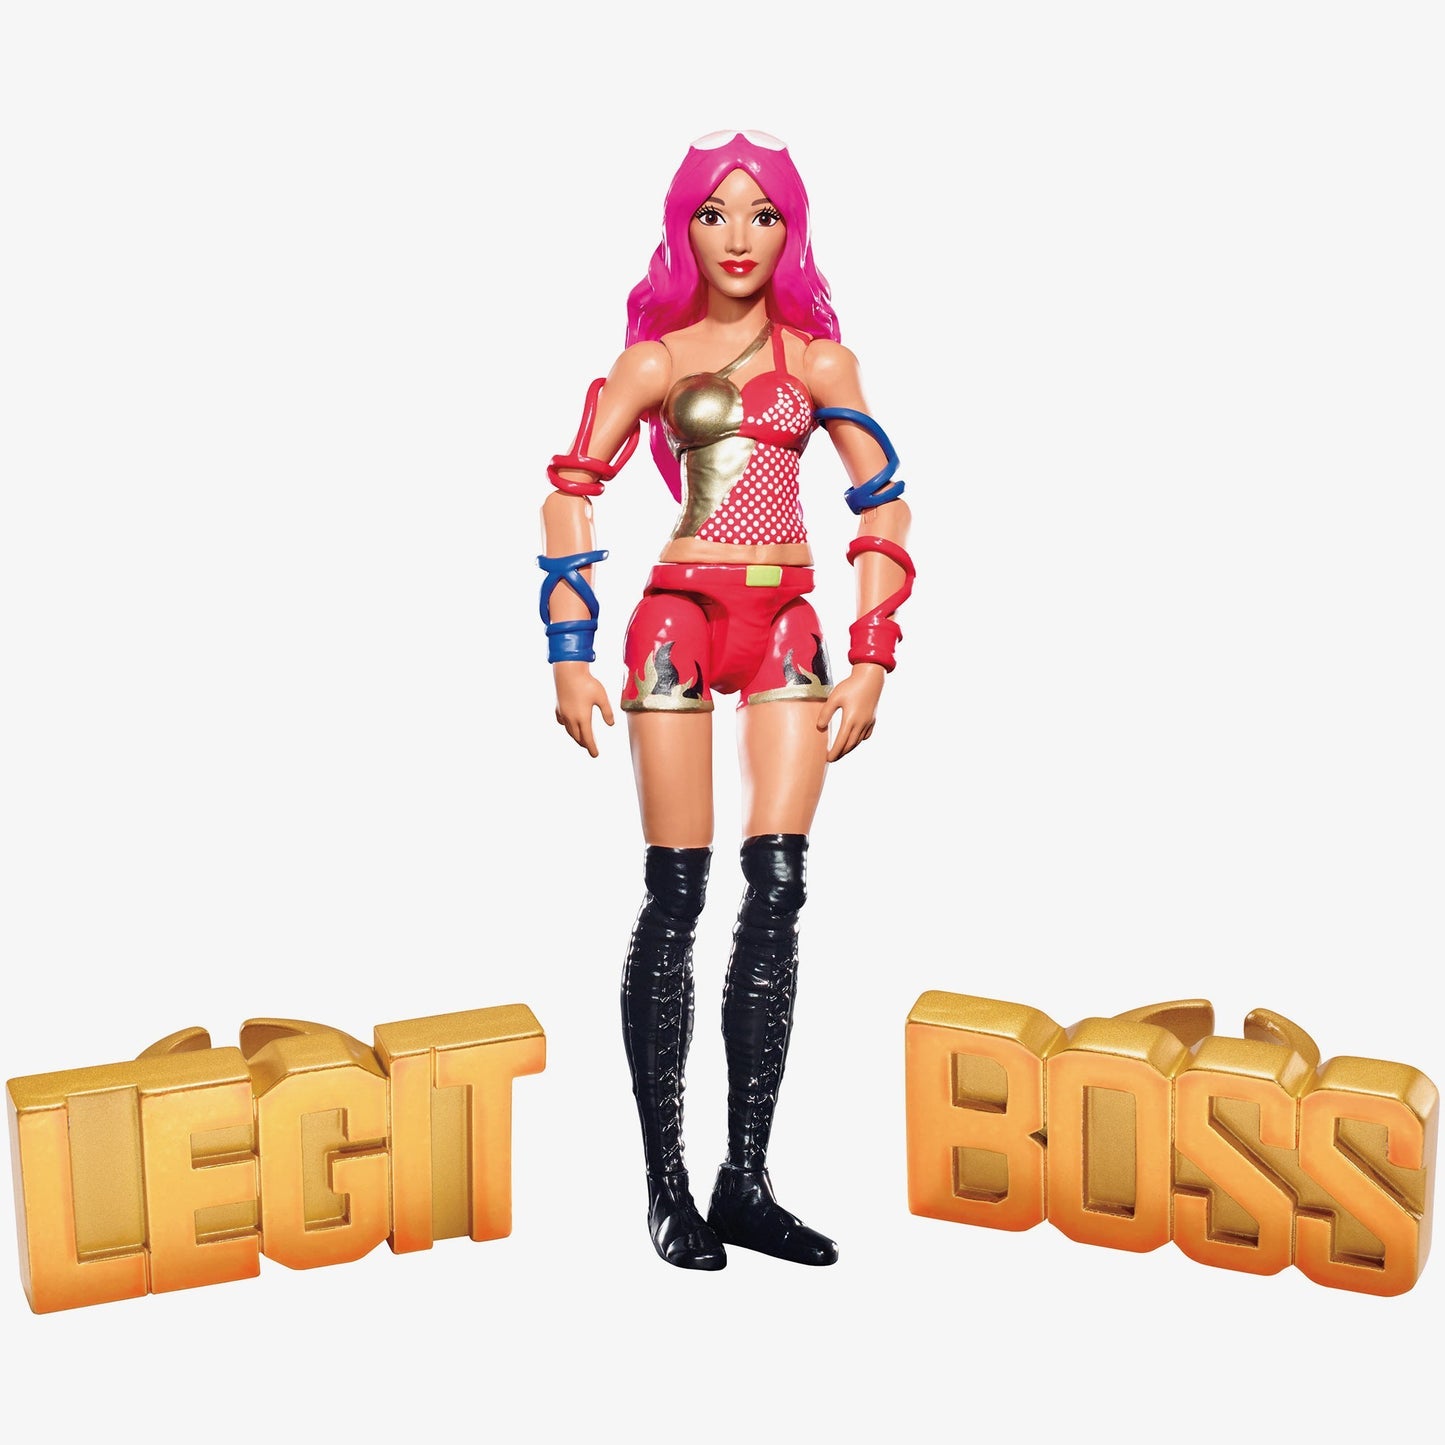 Sasha Banks - WWE Girls Series Ultimate Fan Pack (With DVD & Accessories)